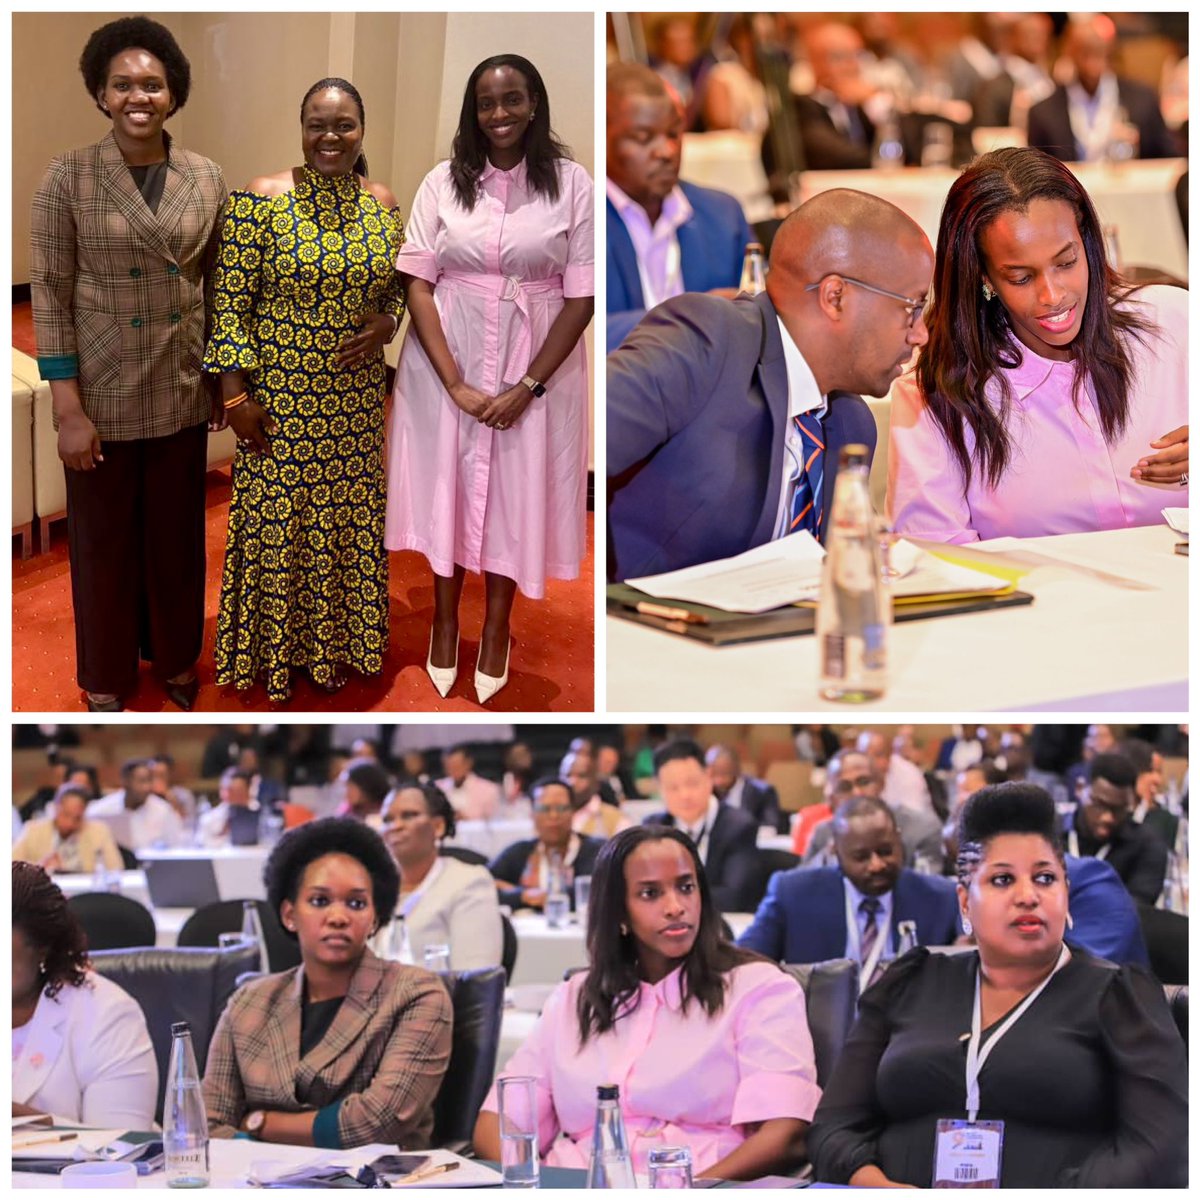 The 9th Oil & Gas Convention. Proud to work alongside our energetic Ministers Hon Nankabirwa and Hon Nyamutoro @NankabirwaRS @PNyamutoro in extracting value for Ugandans in the energy sector.